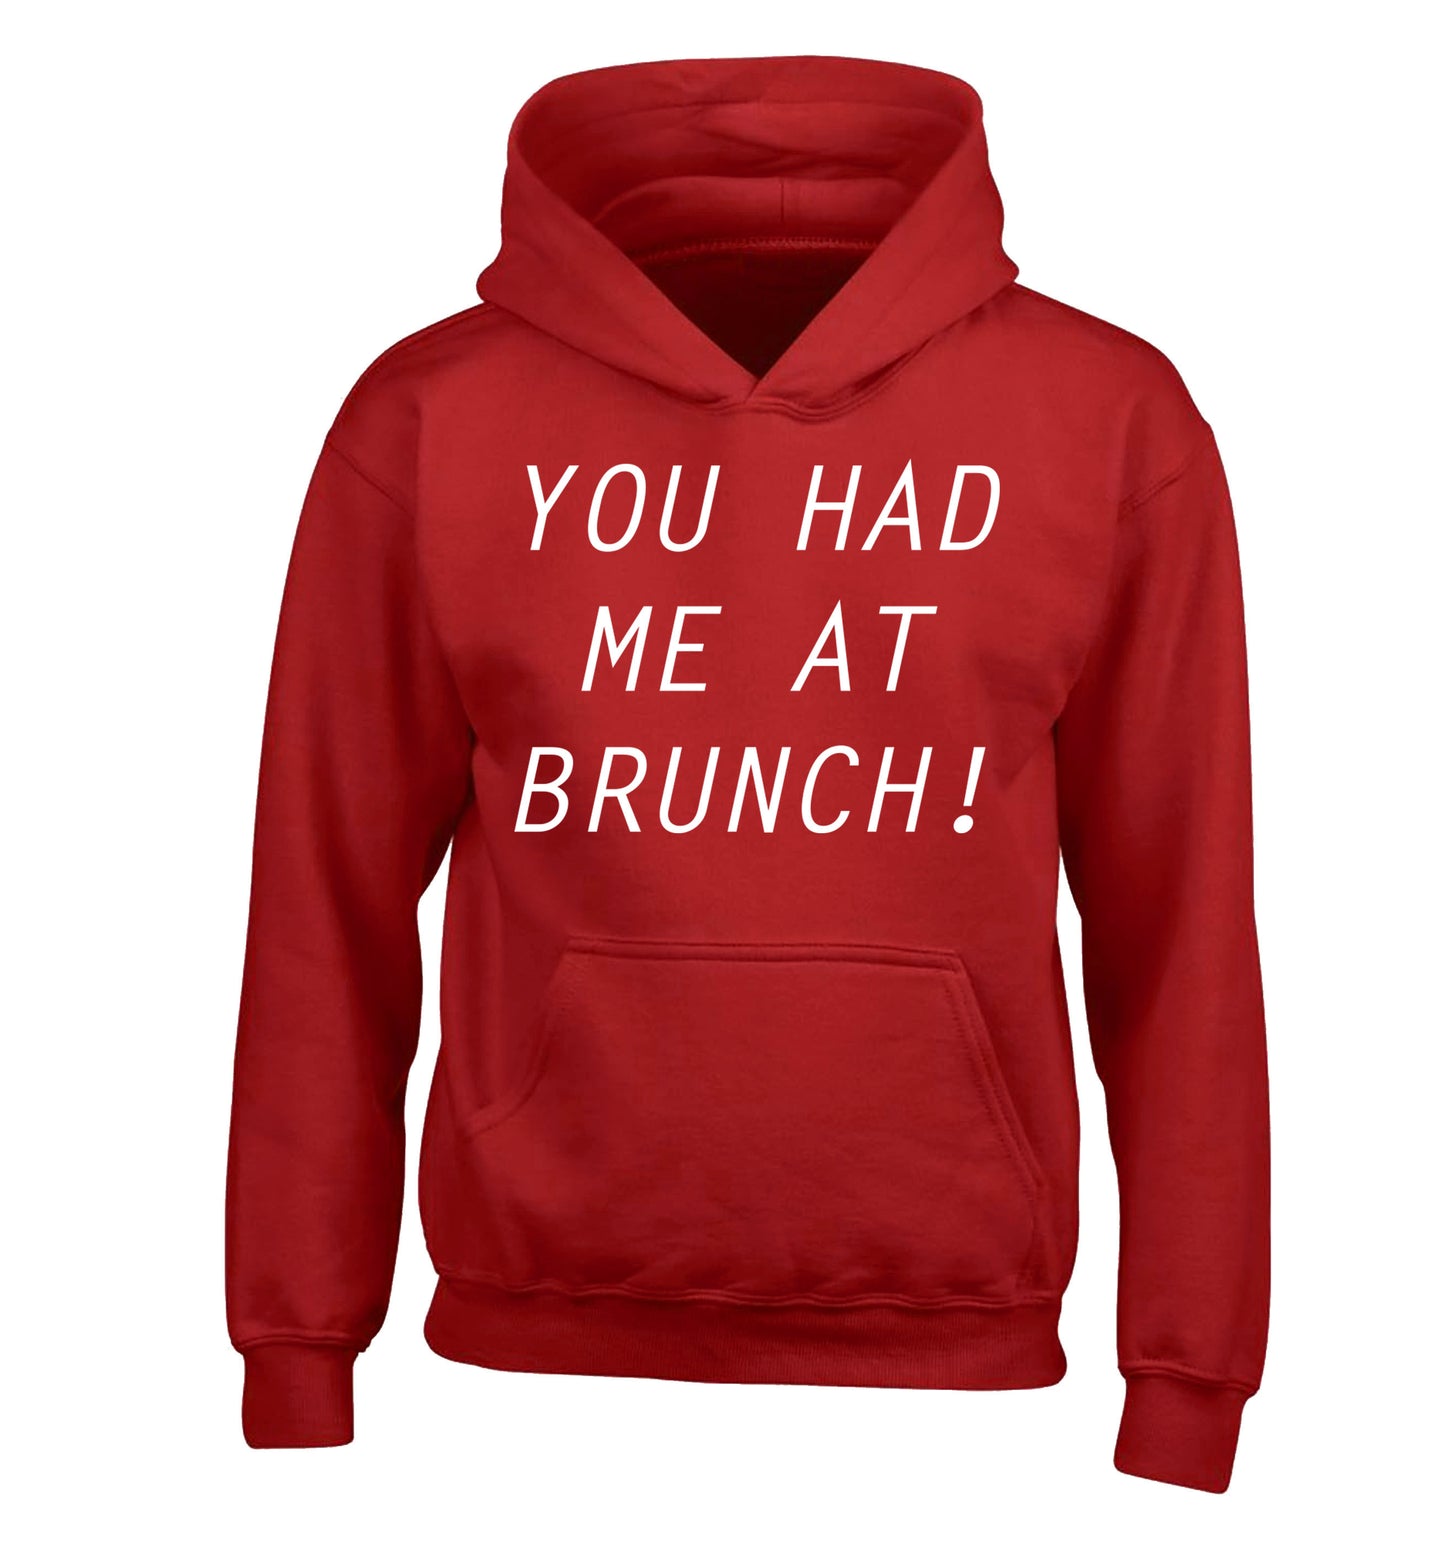 You had me at brunch children's black sweater 12-14 Years